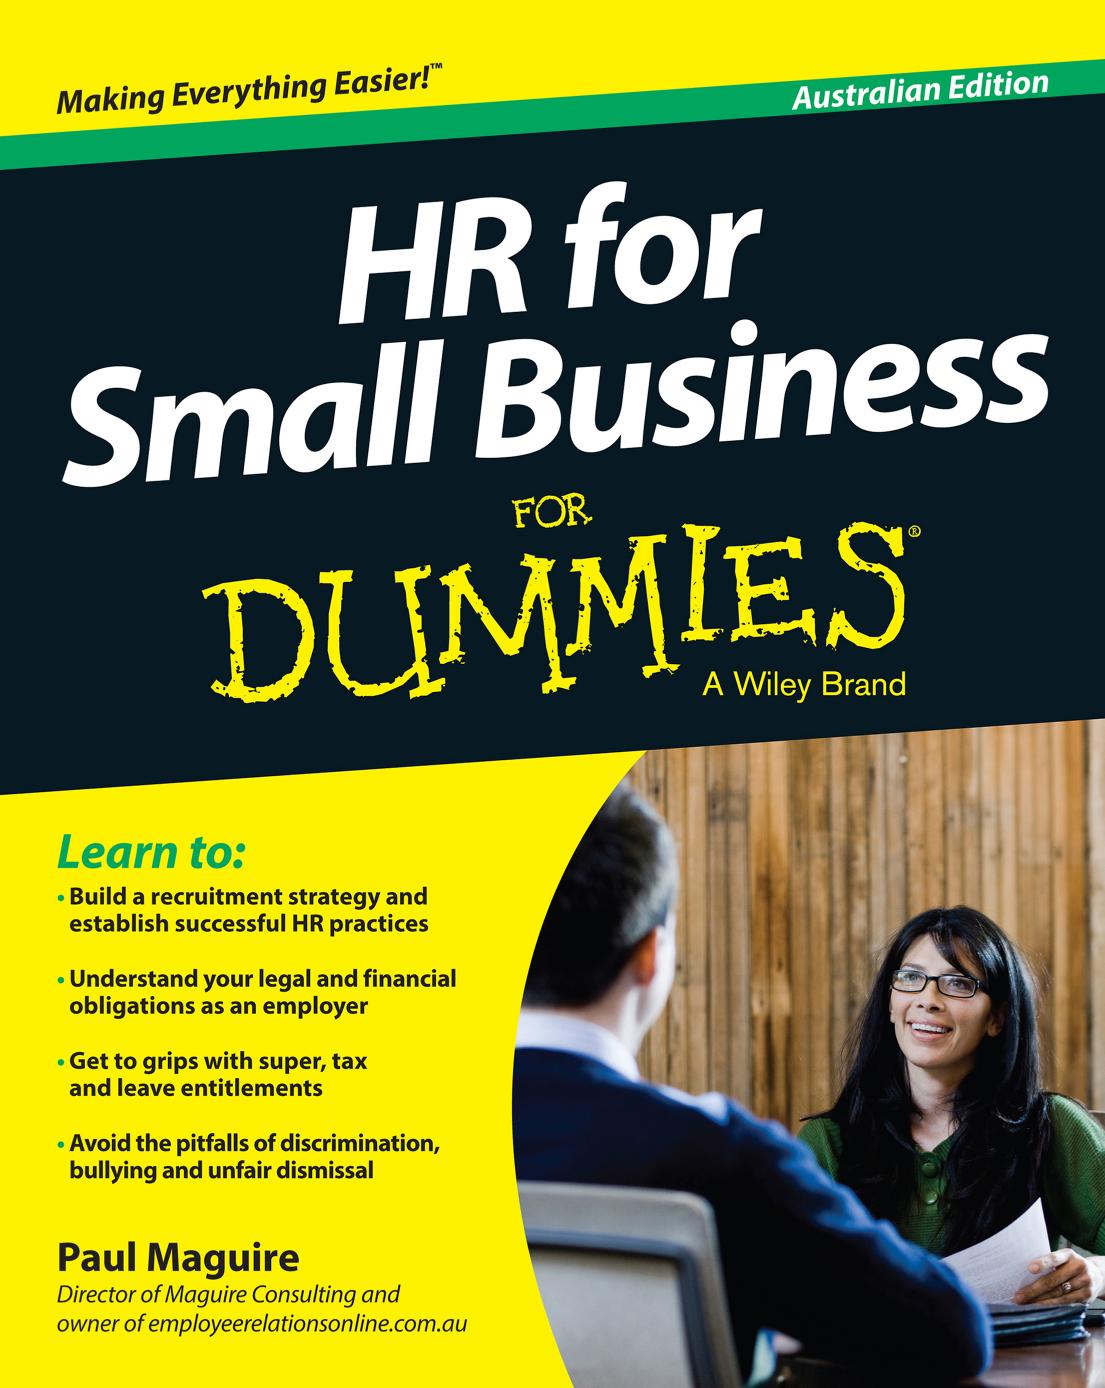 HR For Small Business For Dummies